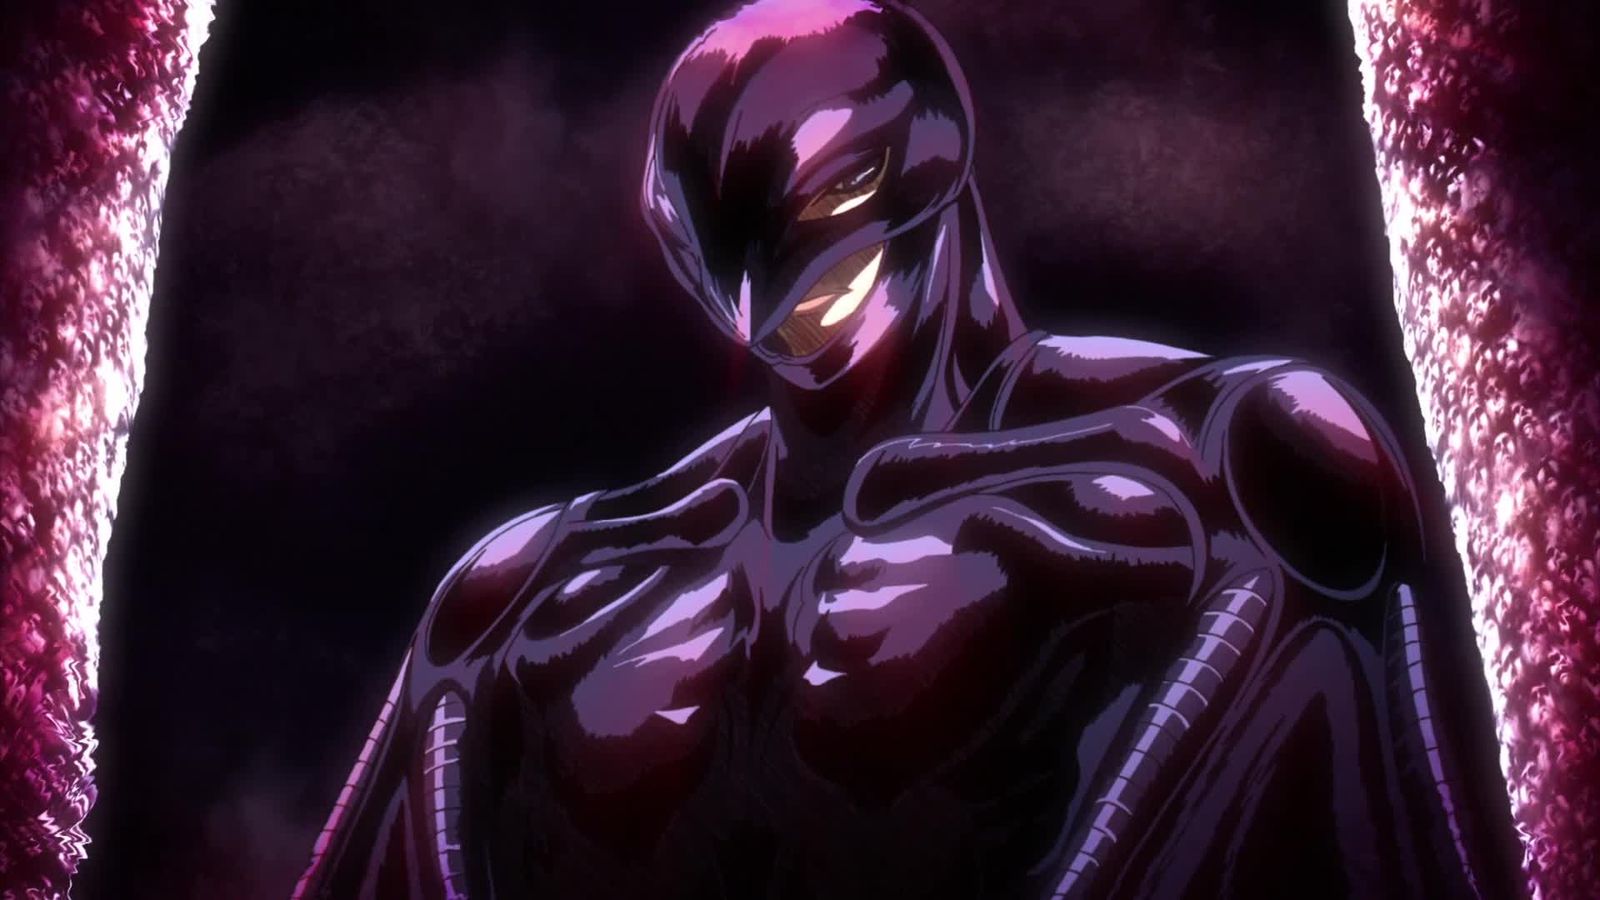 Berserk’s Major Events in the Age of Darkness (AD) Femto